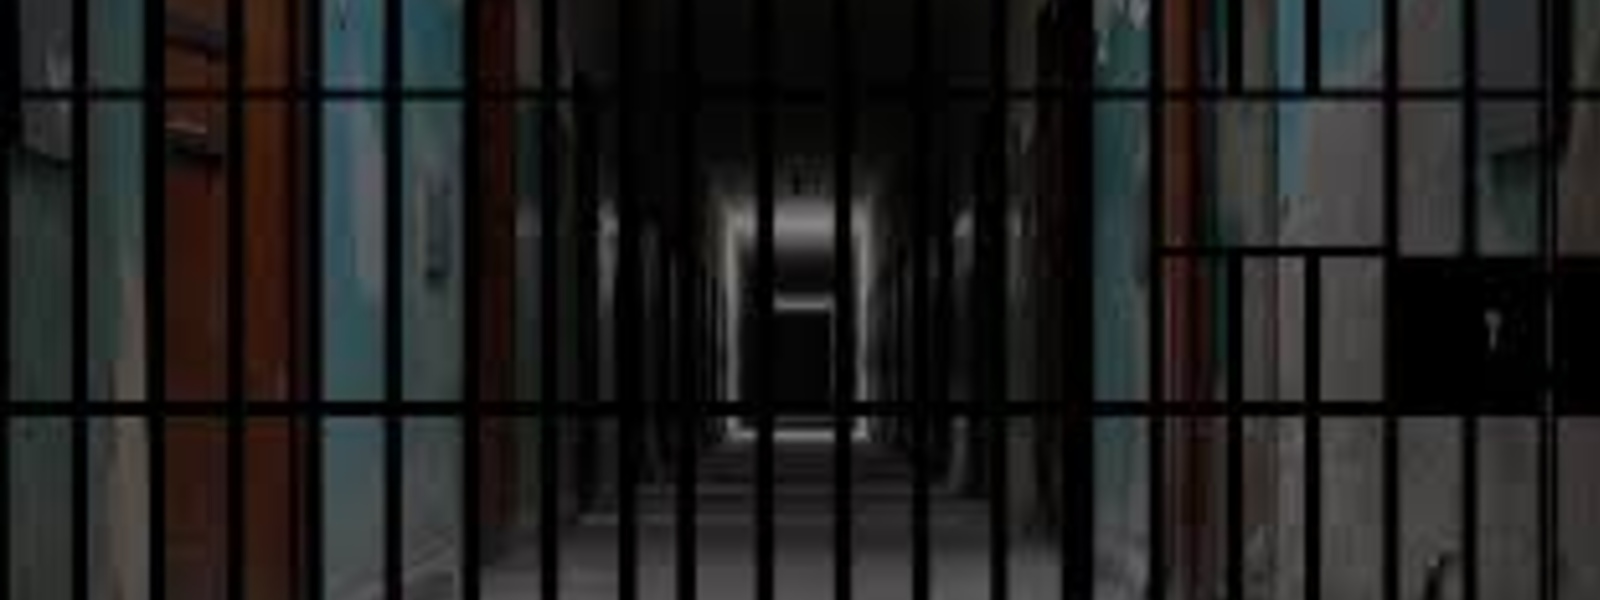 Prison Break in Kalutara – Manhunt launched to arrest escapees